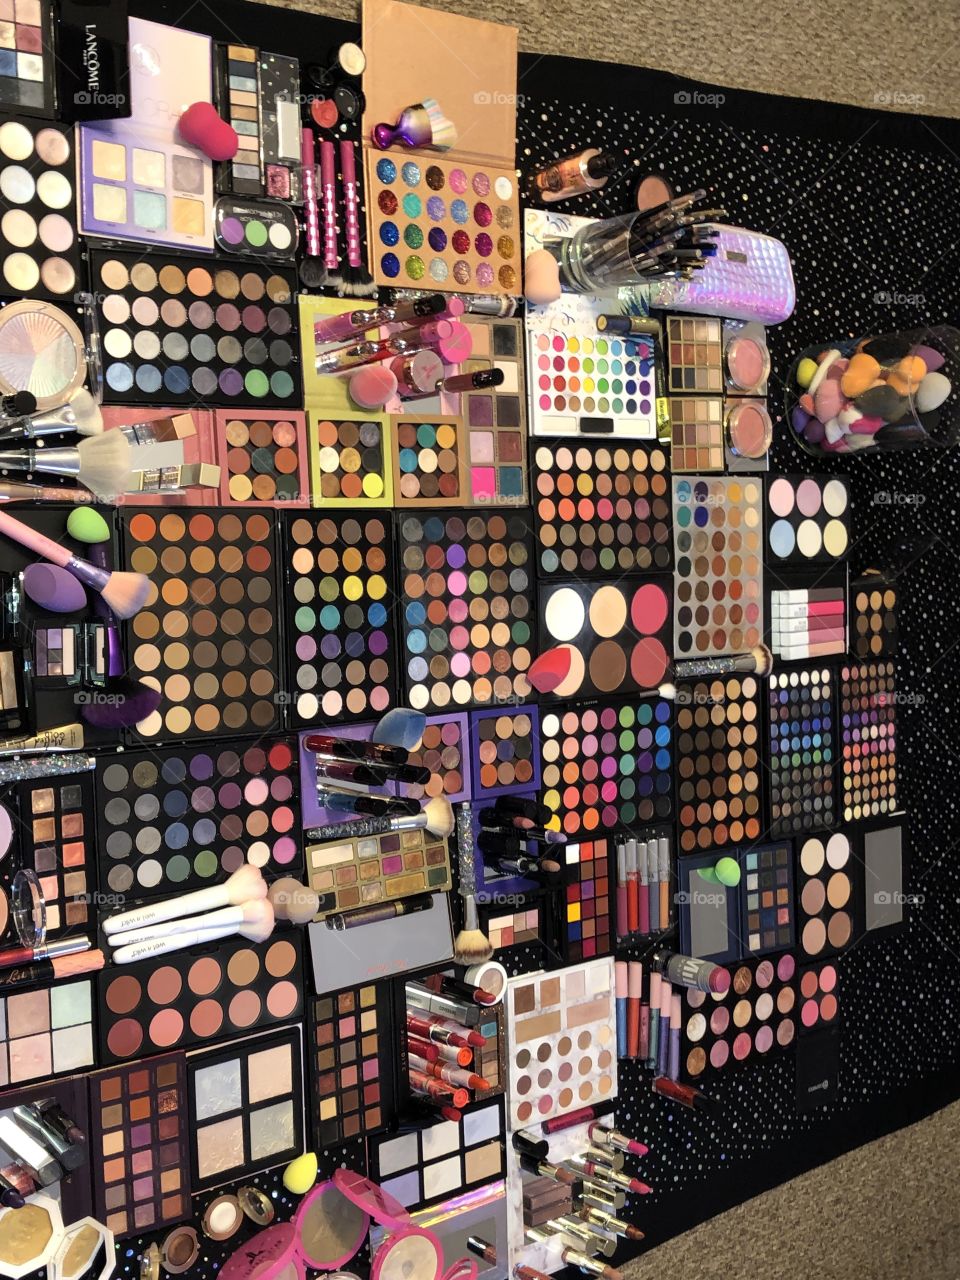 Makeup collection of the century full of the beauty of color.  Can you tell I’m a makeup collector but I also use every bit of it. We have Morphe, Bhcosmetics,Milani,Lancôme,Makeup Rev,Jeffree Star,Katvond,NYX,Colorpop,Wetnwild,Elf,Fakeupfix, etc.